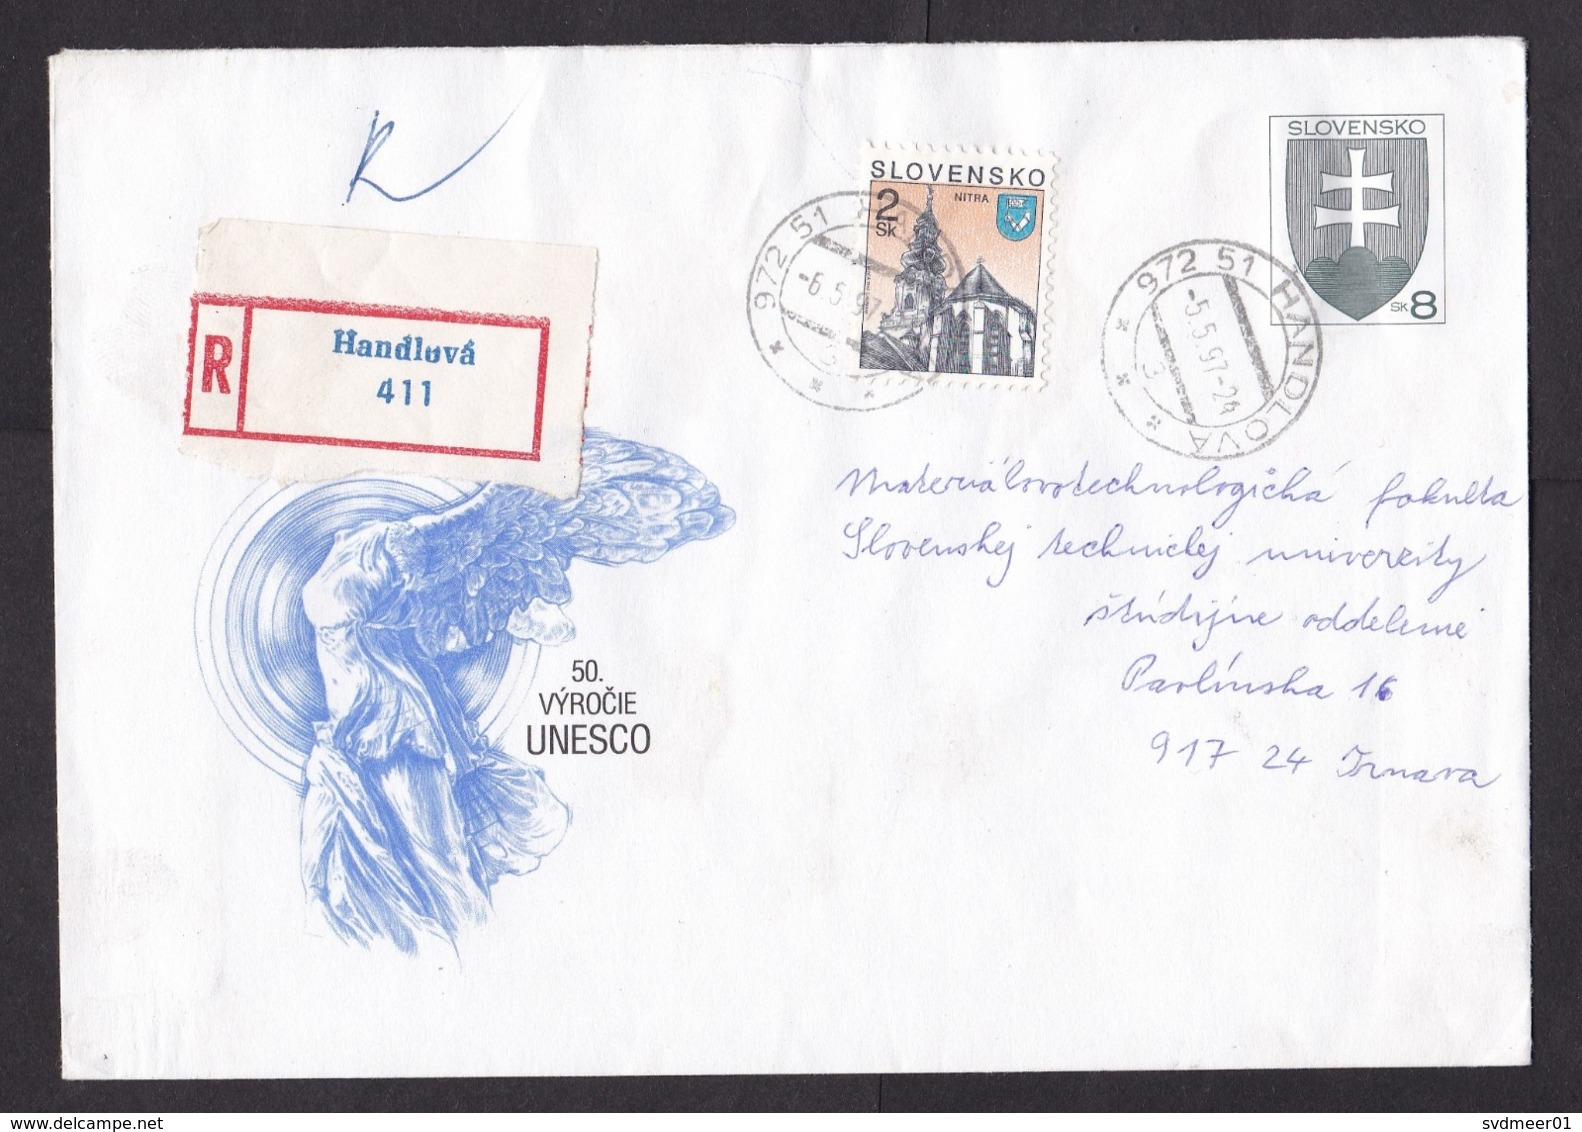 Slovakia: Registered Stationery Cover, 1990s, Extra Stamp, UNESCO, Angel Statue, R-label Handlova (minor Discolouring) - Lettres & Documents